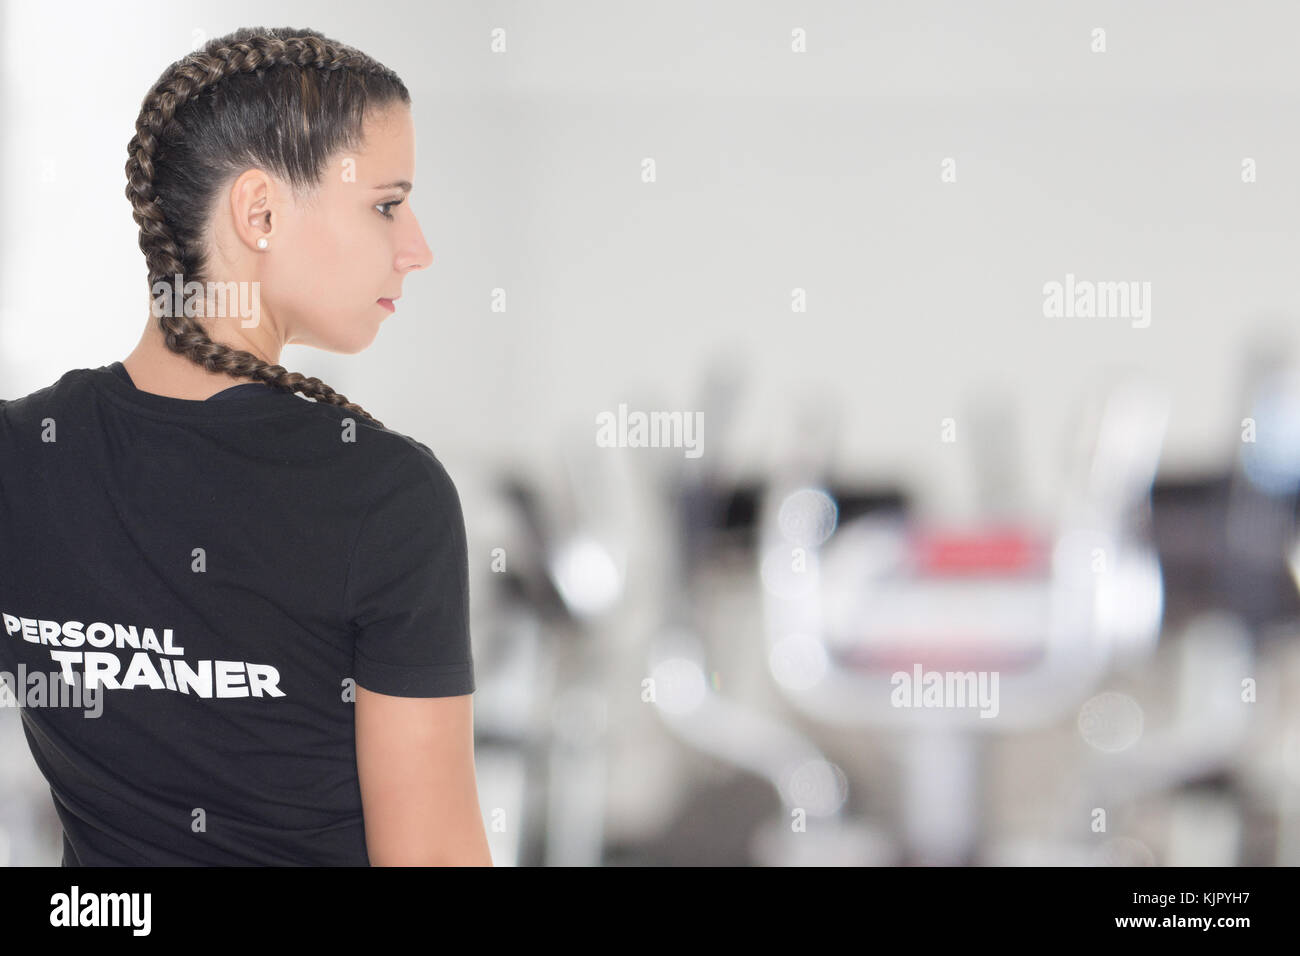 Female Personal Trainer, with her back facing the camera in a gym Stock Photo